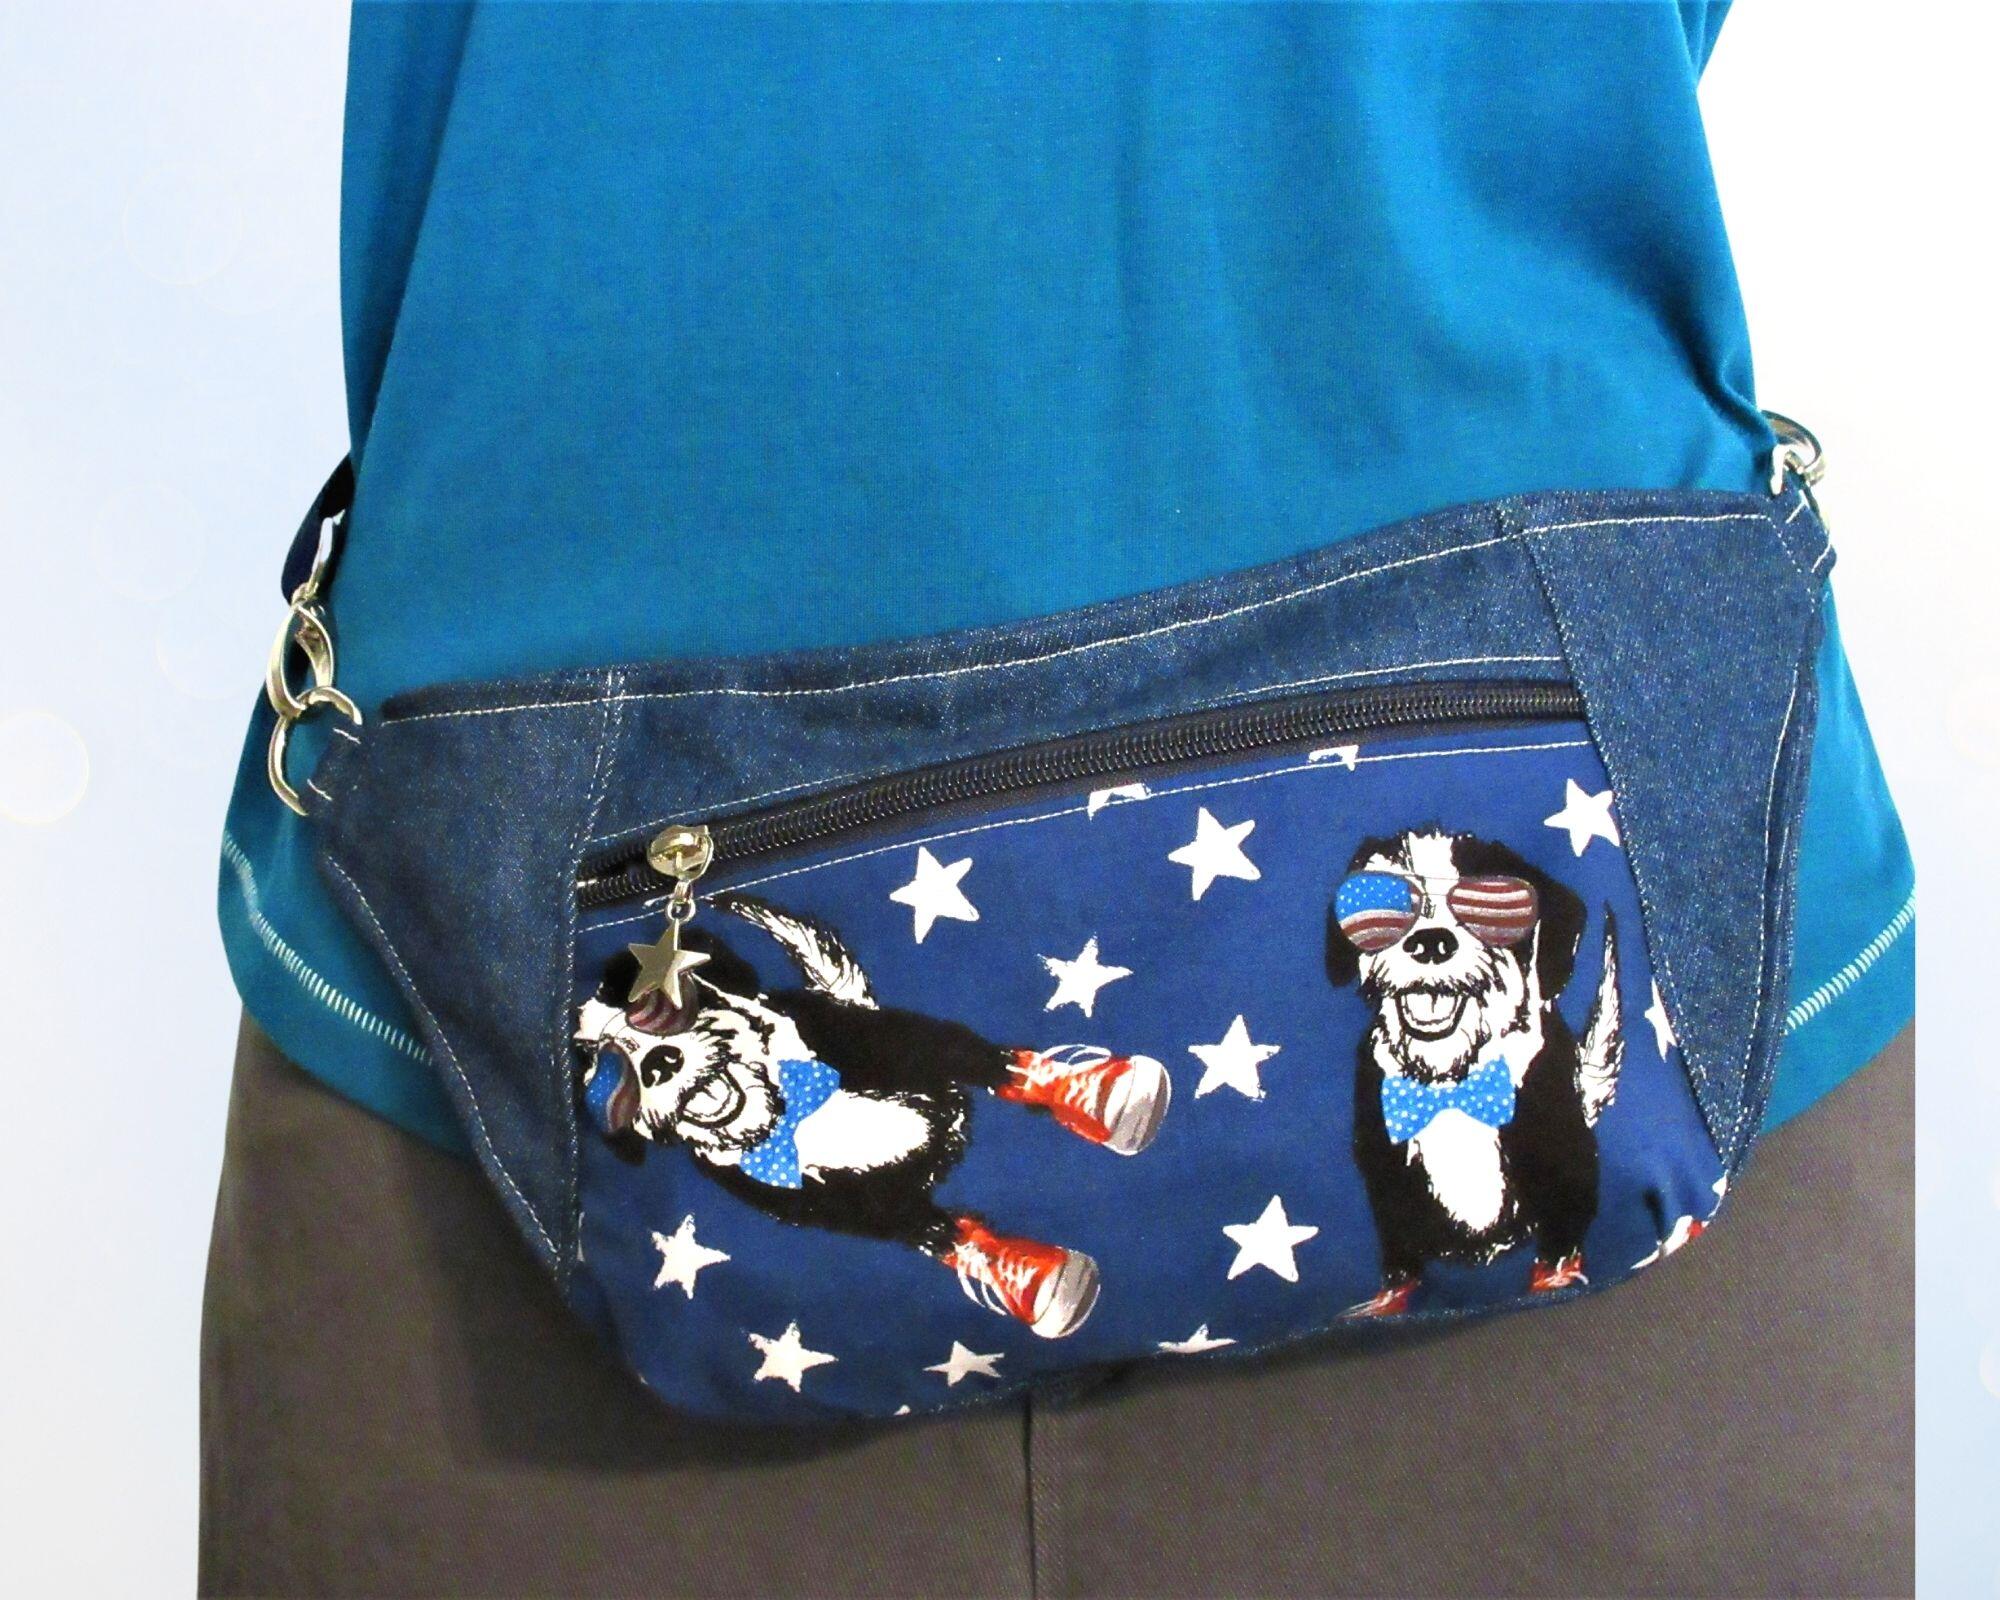 hipster americana Rock Star Dog Fanny Pack for men or women Adjustable strap with Red white and blue lining bum bag